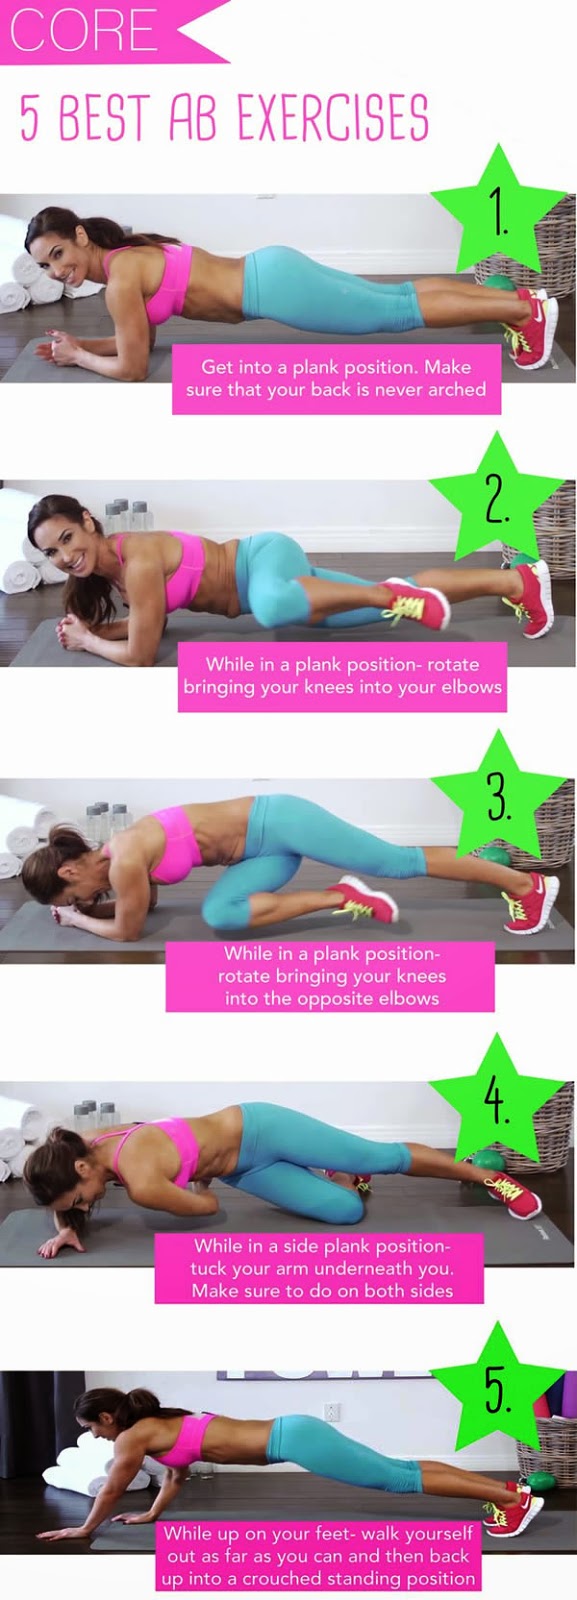 5 best ab exercises! Printable card to go :) #workout #bodyweight #fatloss #exercise #core